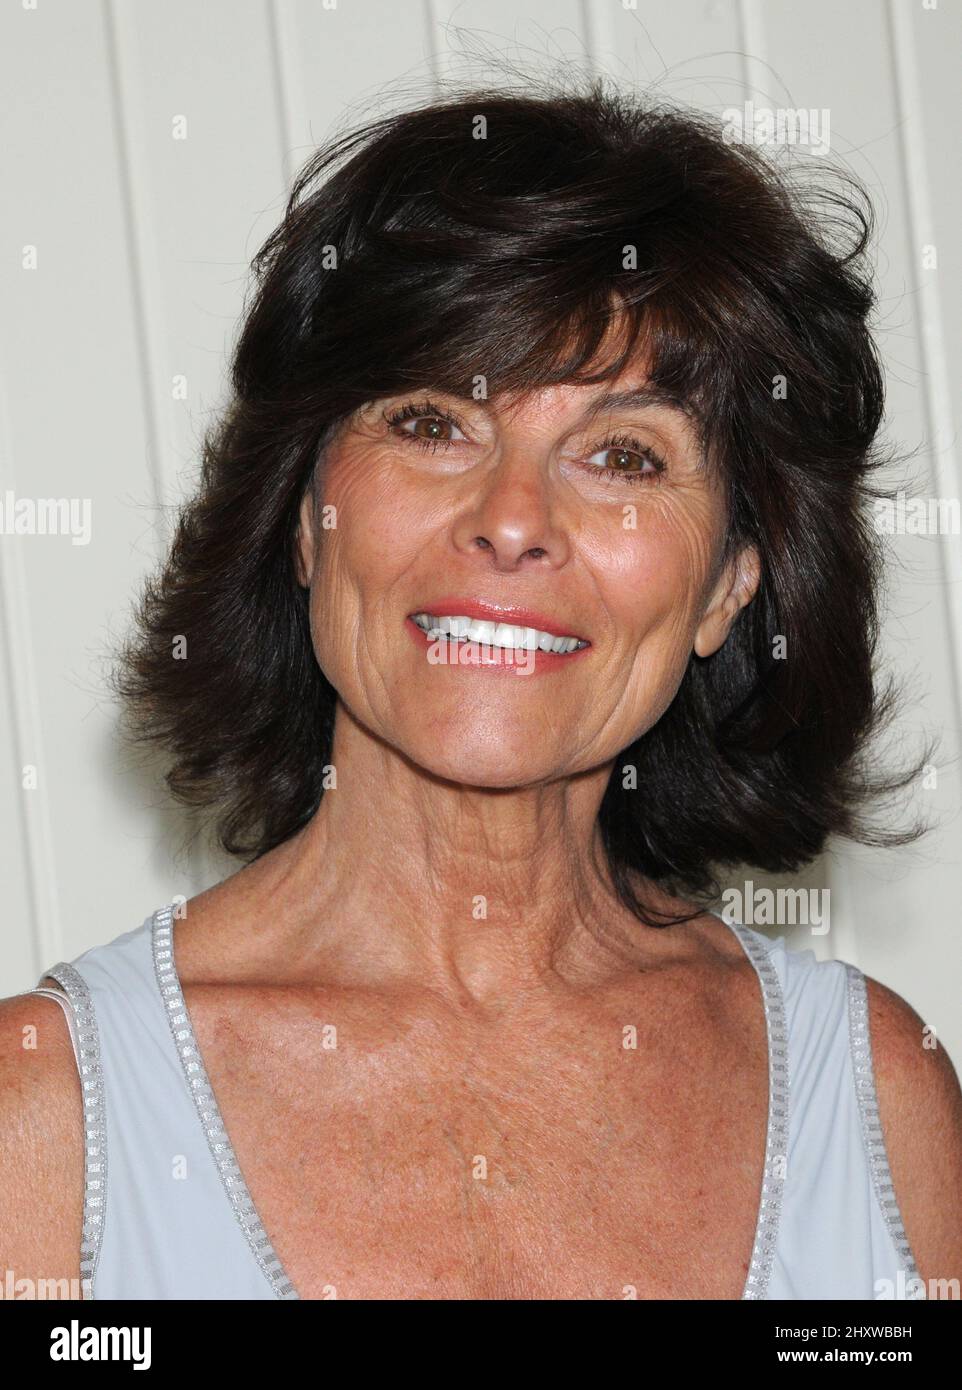 Adrienne Barbeau at the 'General Hospital' fan club luncheon held at the Sportsmens Lodge in Studio City California Stock Photo